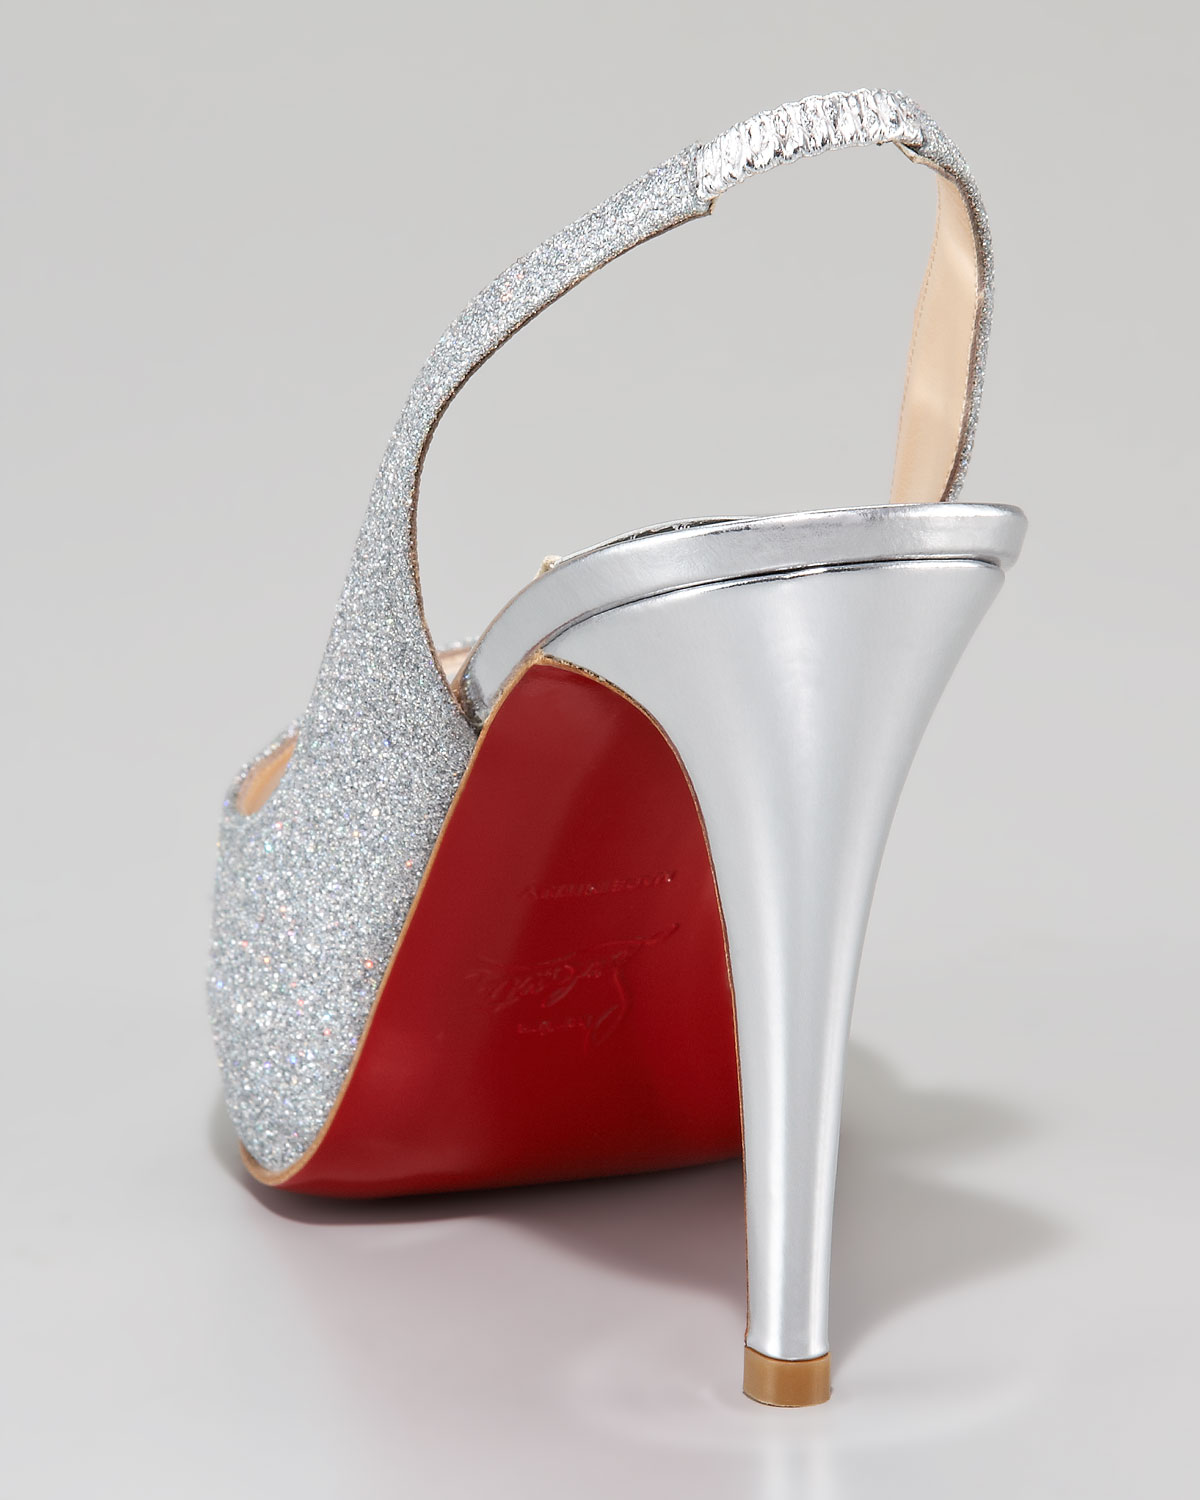 christian louboutin No Prive pumps | Boulder Poetry Tribe